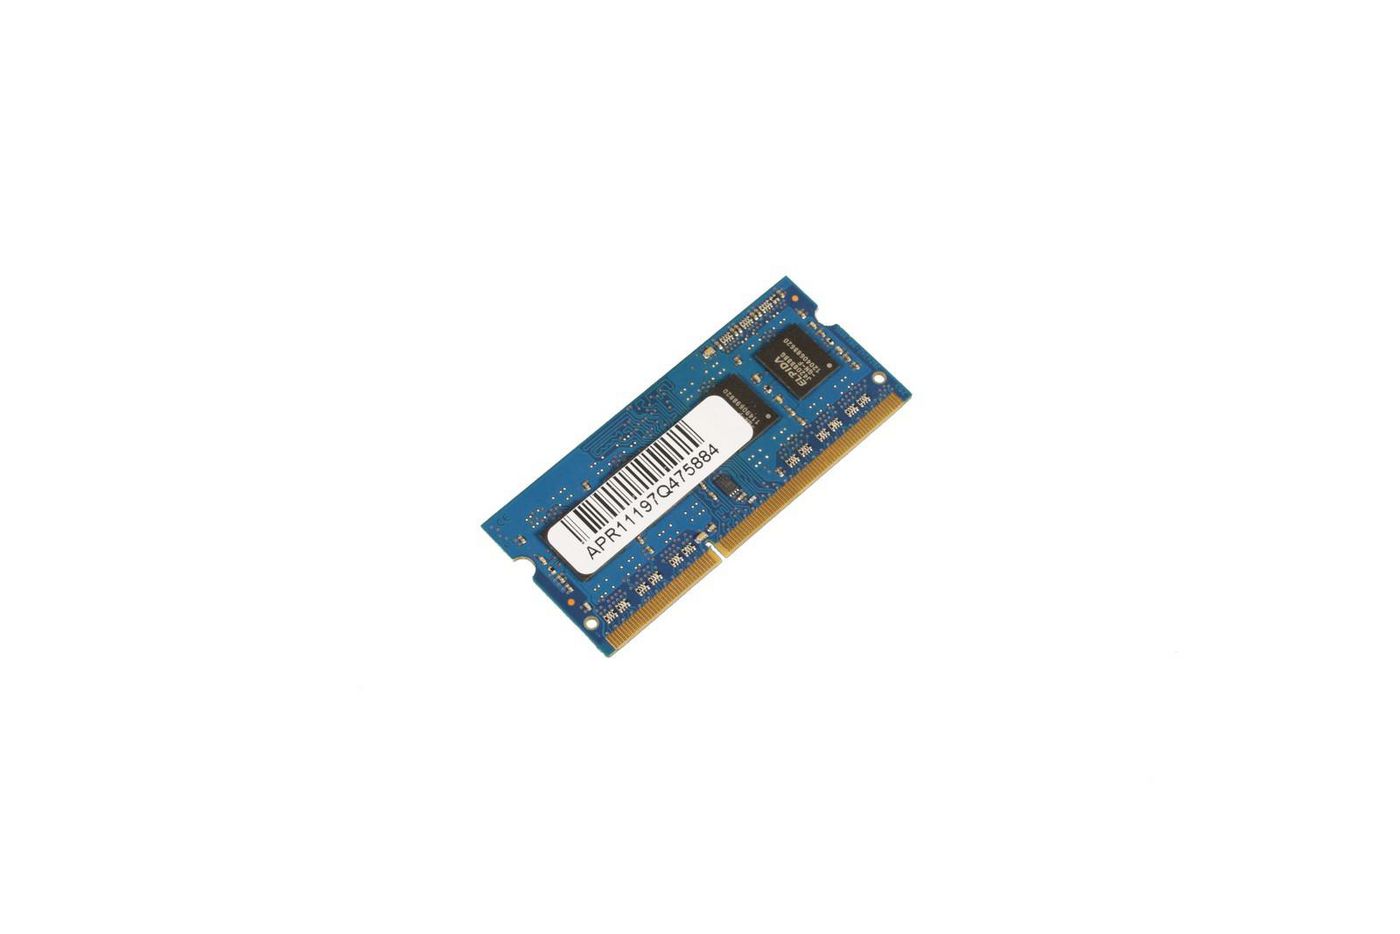 MICROMEMORY 4GB DDR3 1600MHz PC3-12800